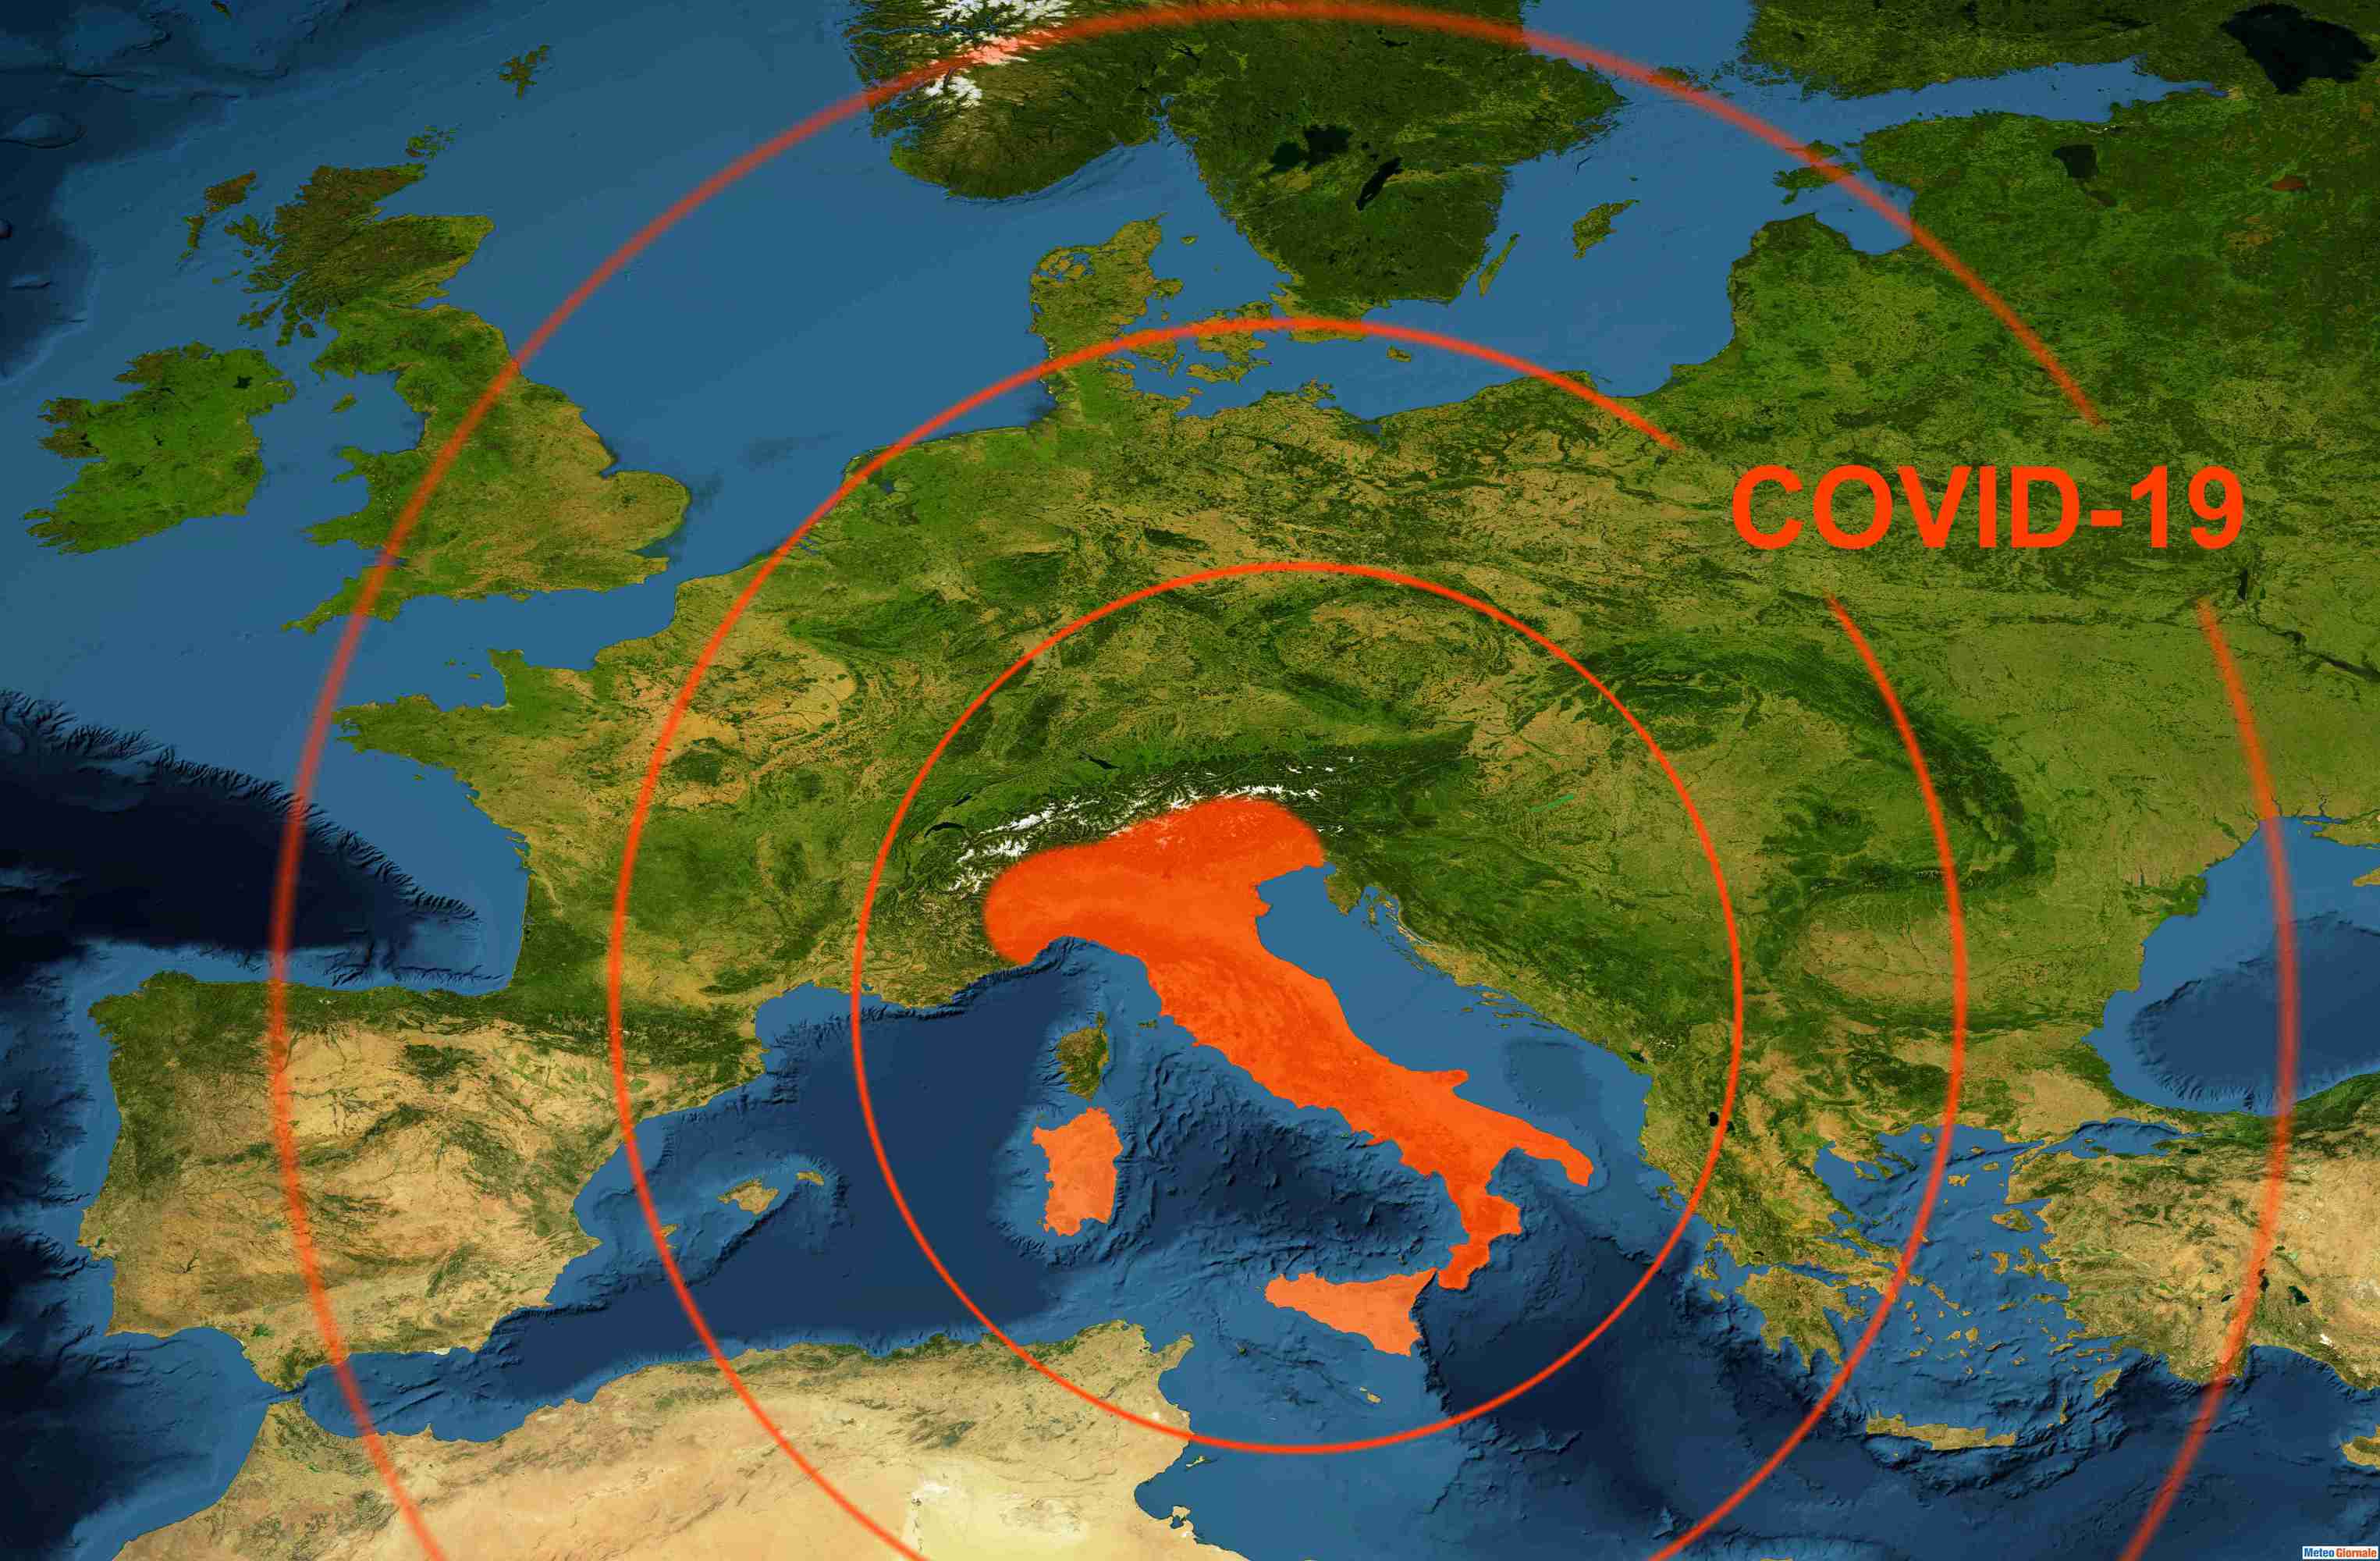 Coronavirus epidemic, word COVID-19 on Europe map. Novel coronavirus outbreak in Italy, the spread of corona virus in the World. COVID-19 infection concept. Elements of this image furnished by NASA.